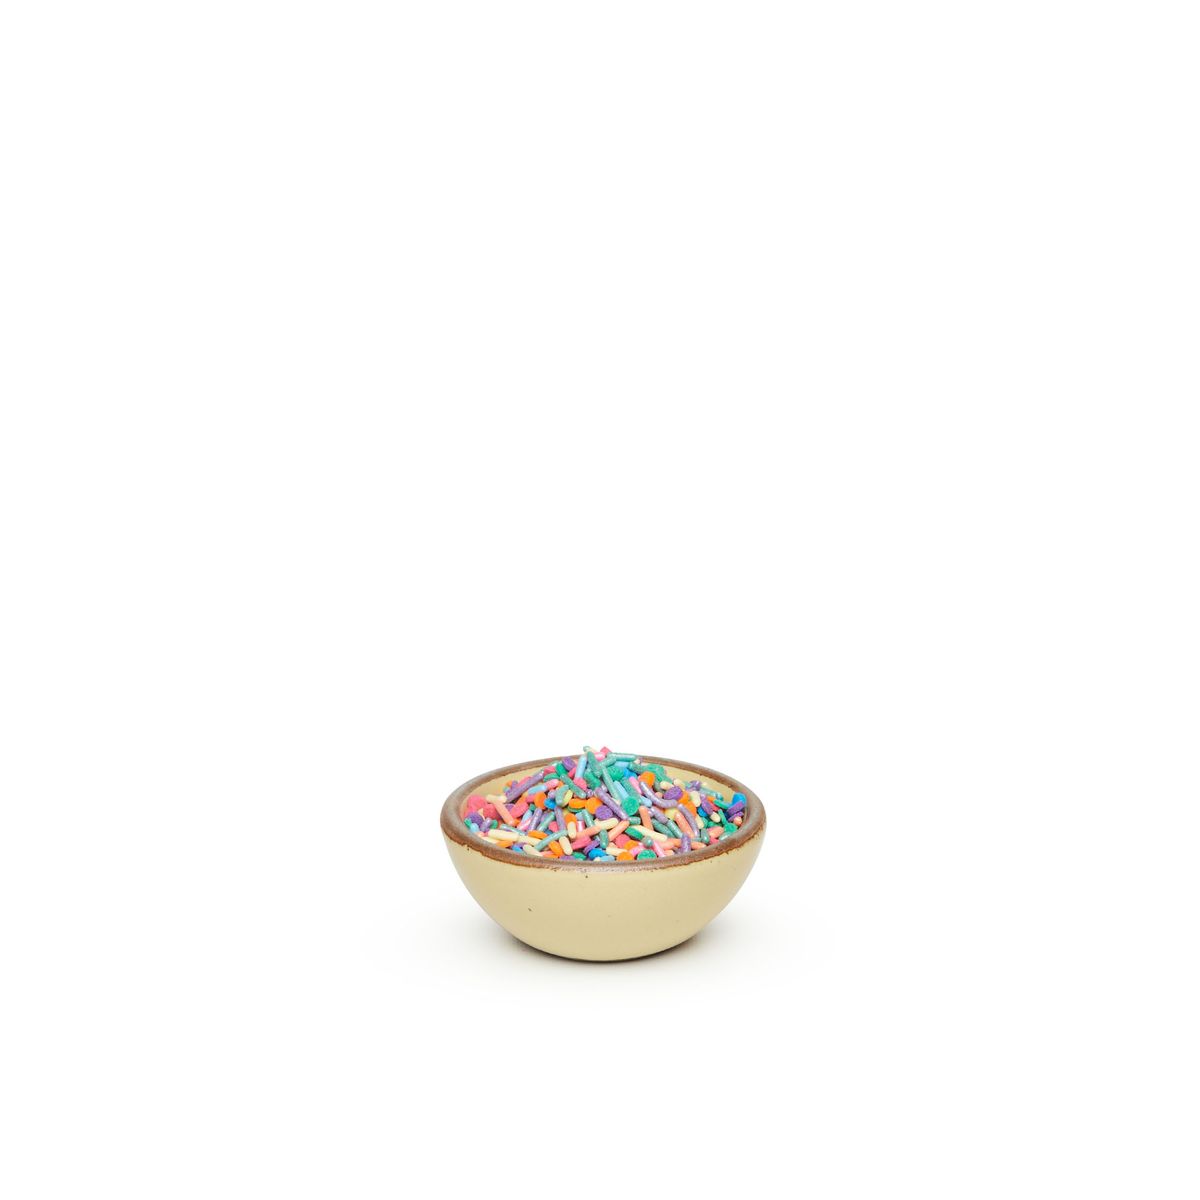 A tiny rounded ceramic bowl in a light butter yellow color featuring iron speckles and an unglazed rim, filled with sprinkles